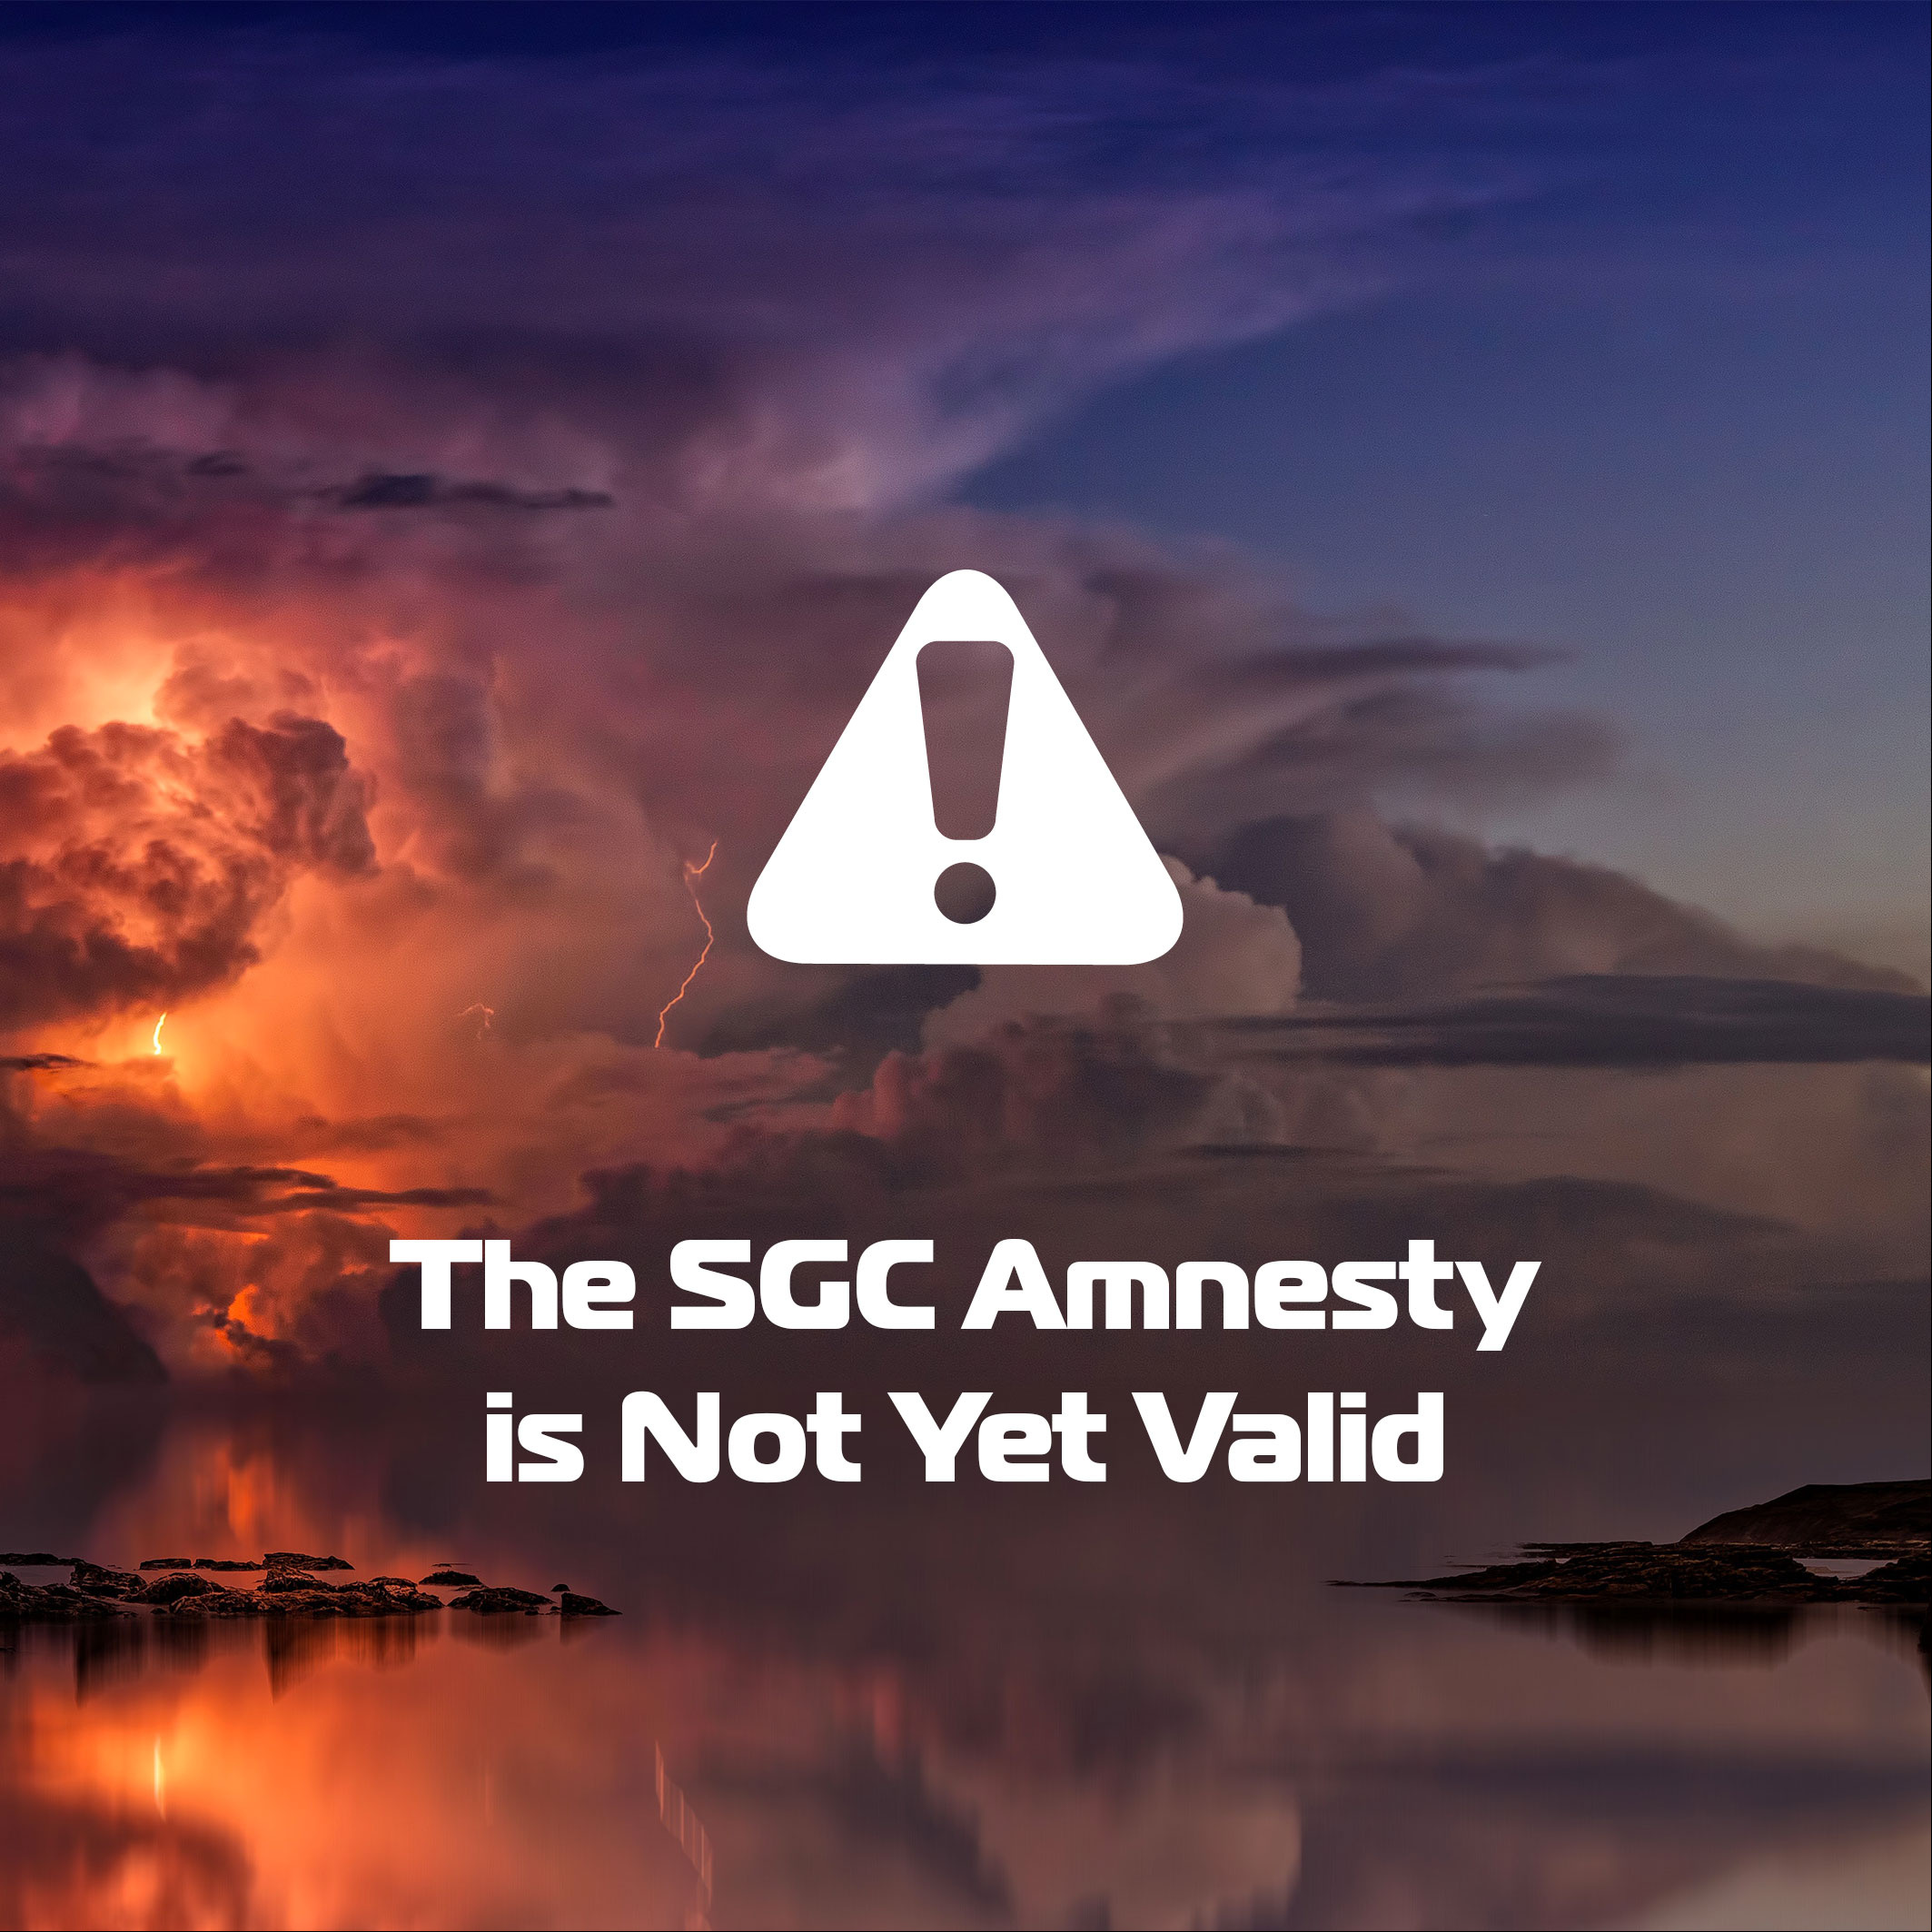 The SGC Amnesty is Not Yet Valid